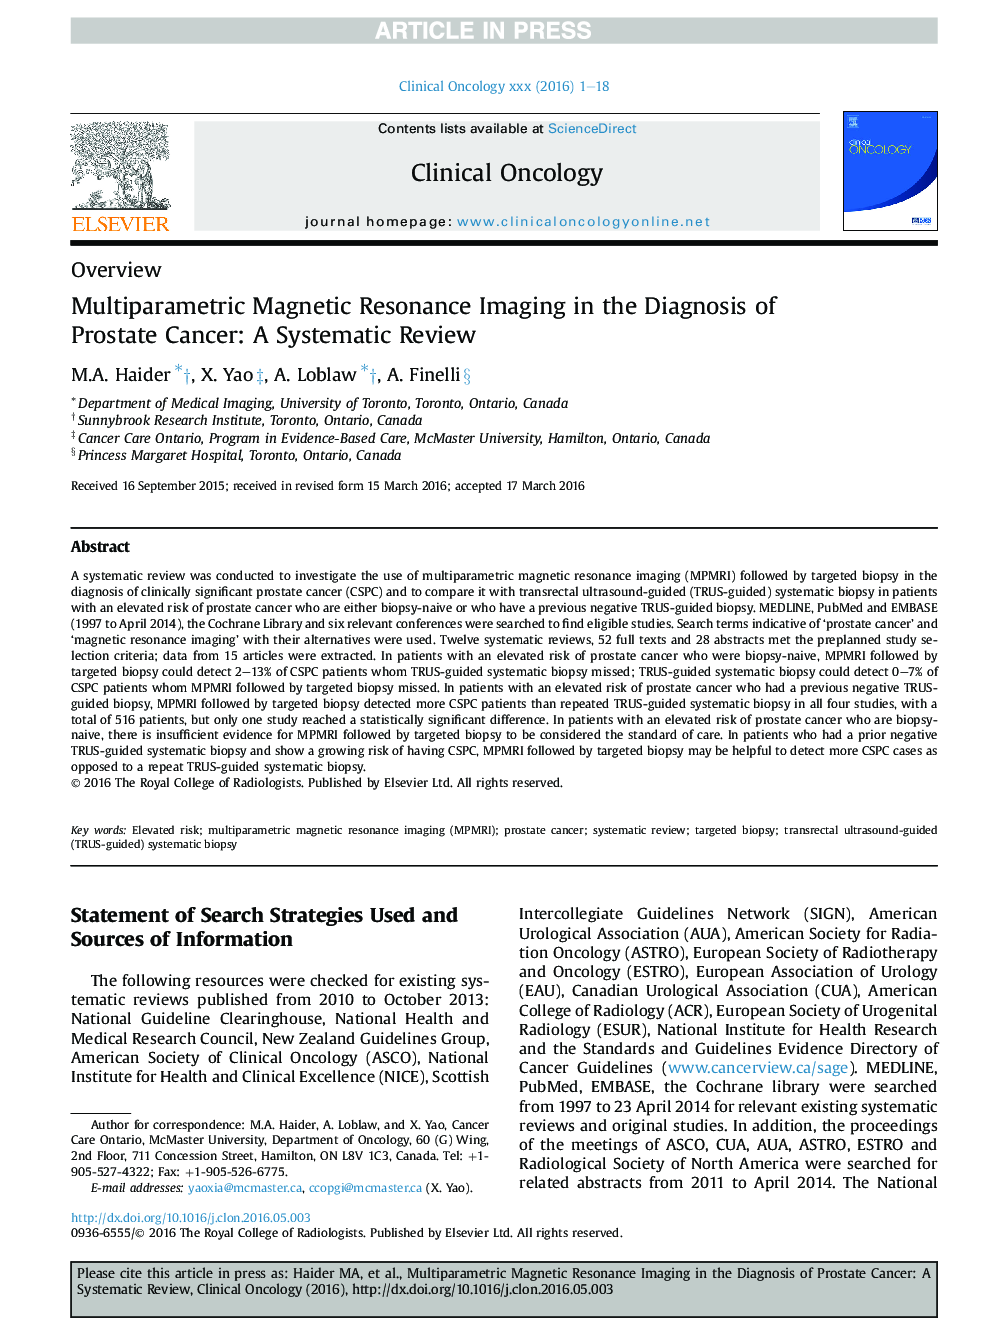 Multiparametric Magnetic Resonance Imaging in the Diagnosis of Prostate Cancer: A Systematic Review